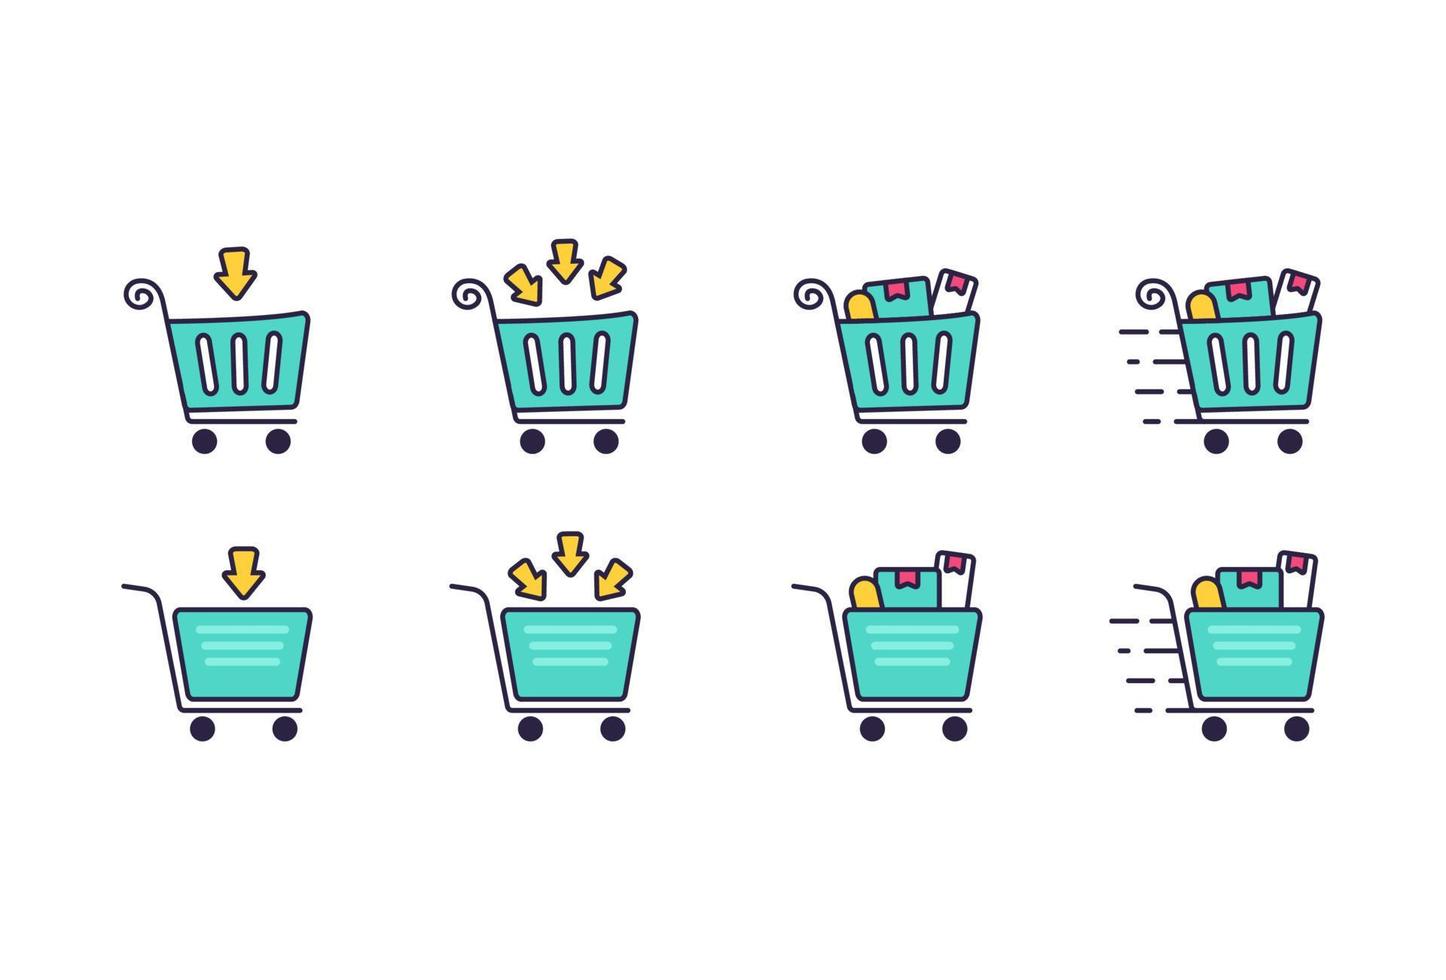 Add to chart retail shopping cart trolley icon filled outline style set collection with various condition from empty, full item filled, and in delivery process vector